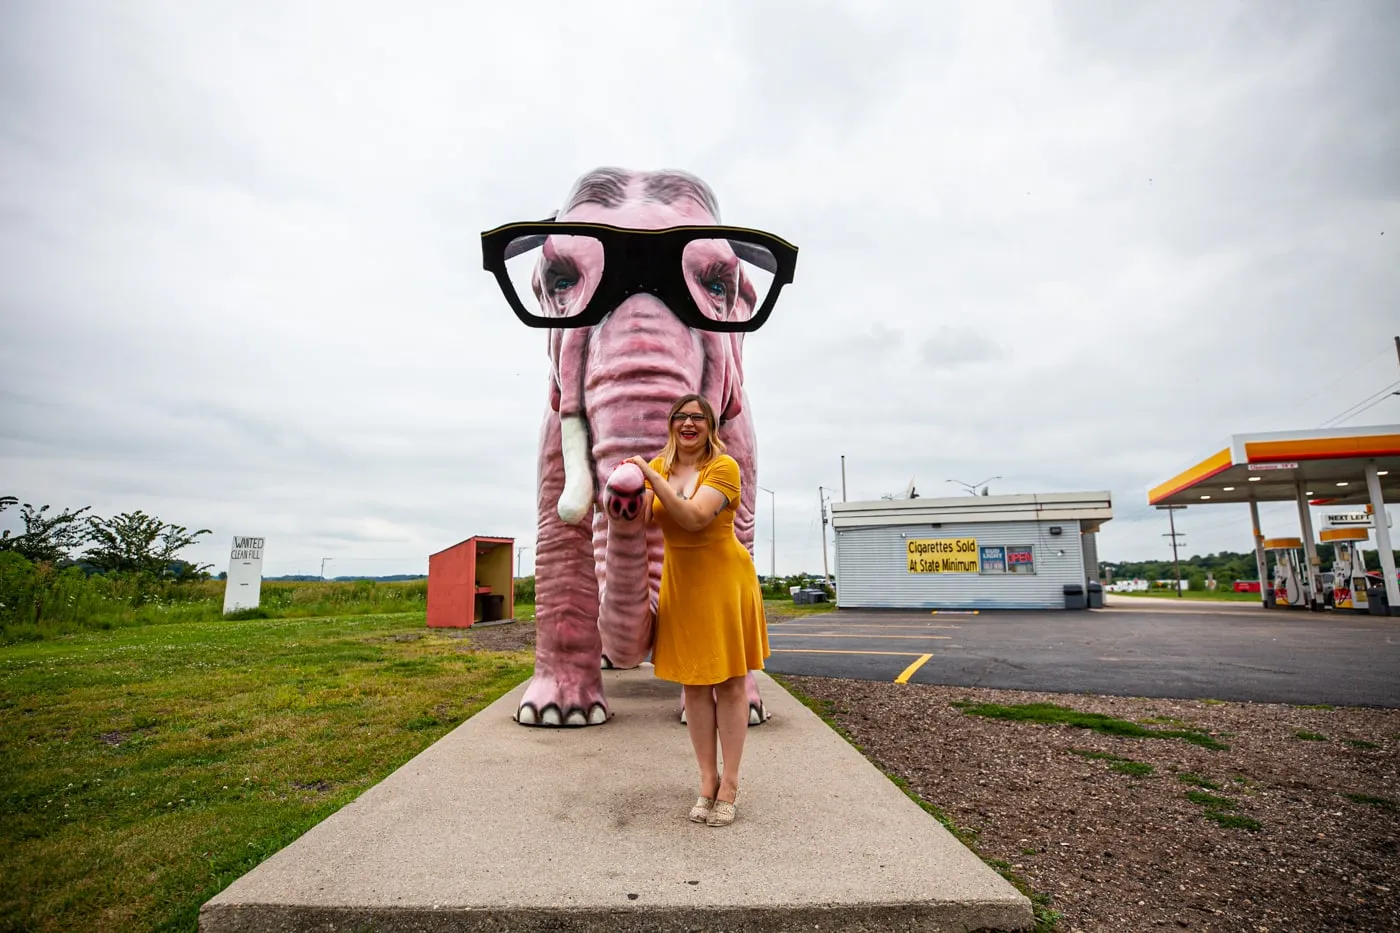 Pinkie the Pink Elephant in DeForest, Wisconsin. Giant Pink Elephant with Glasses roadside attraction in Wisconsin.